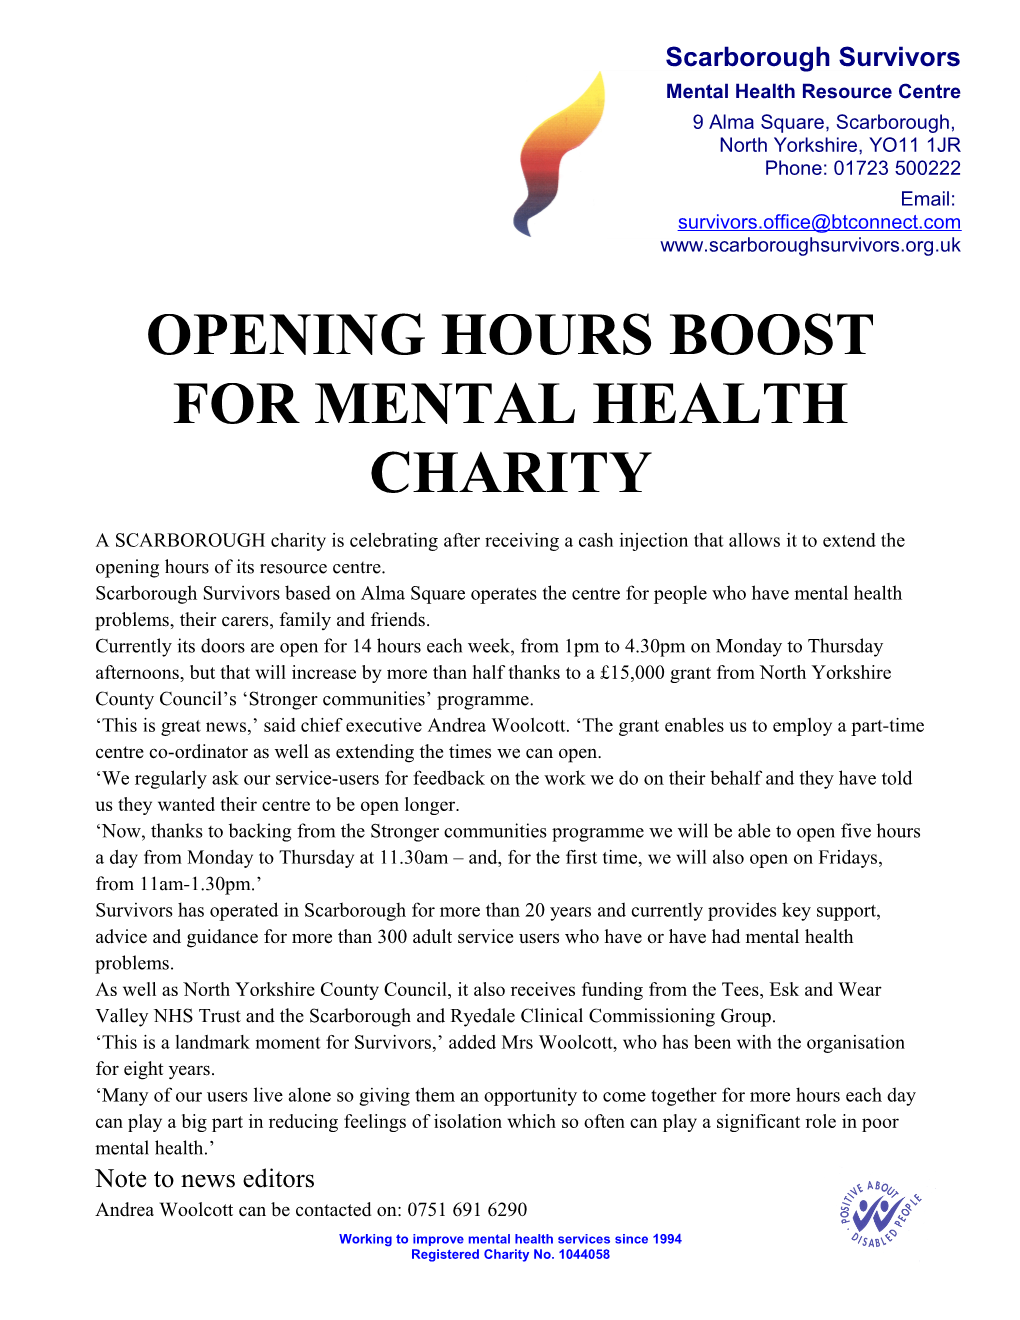 Opening Hours Boost for Mental Health Charity